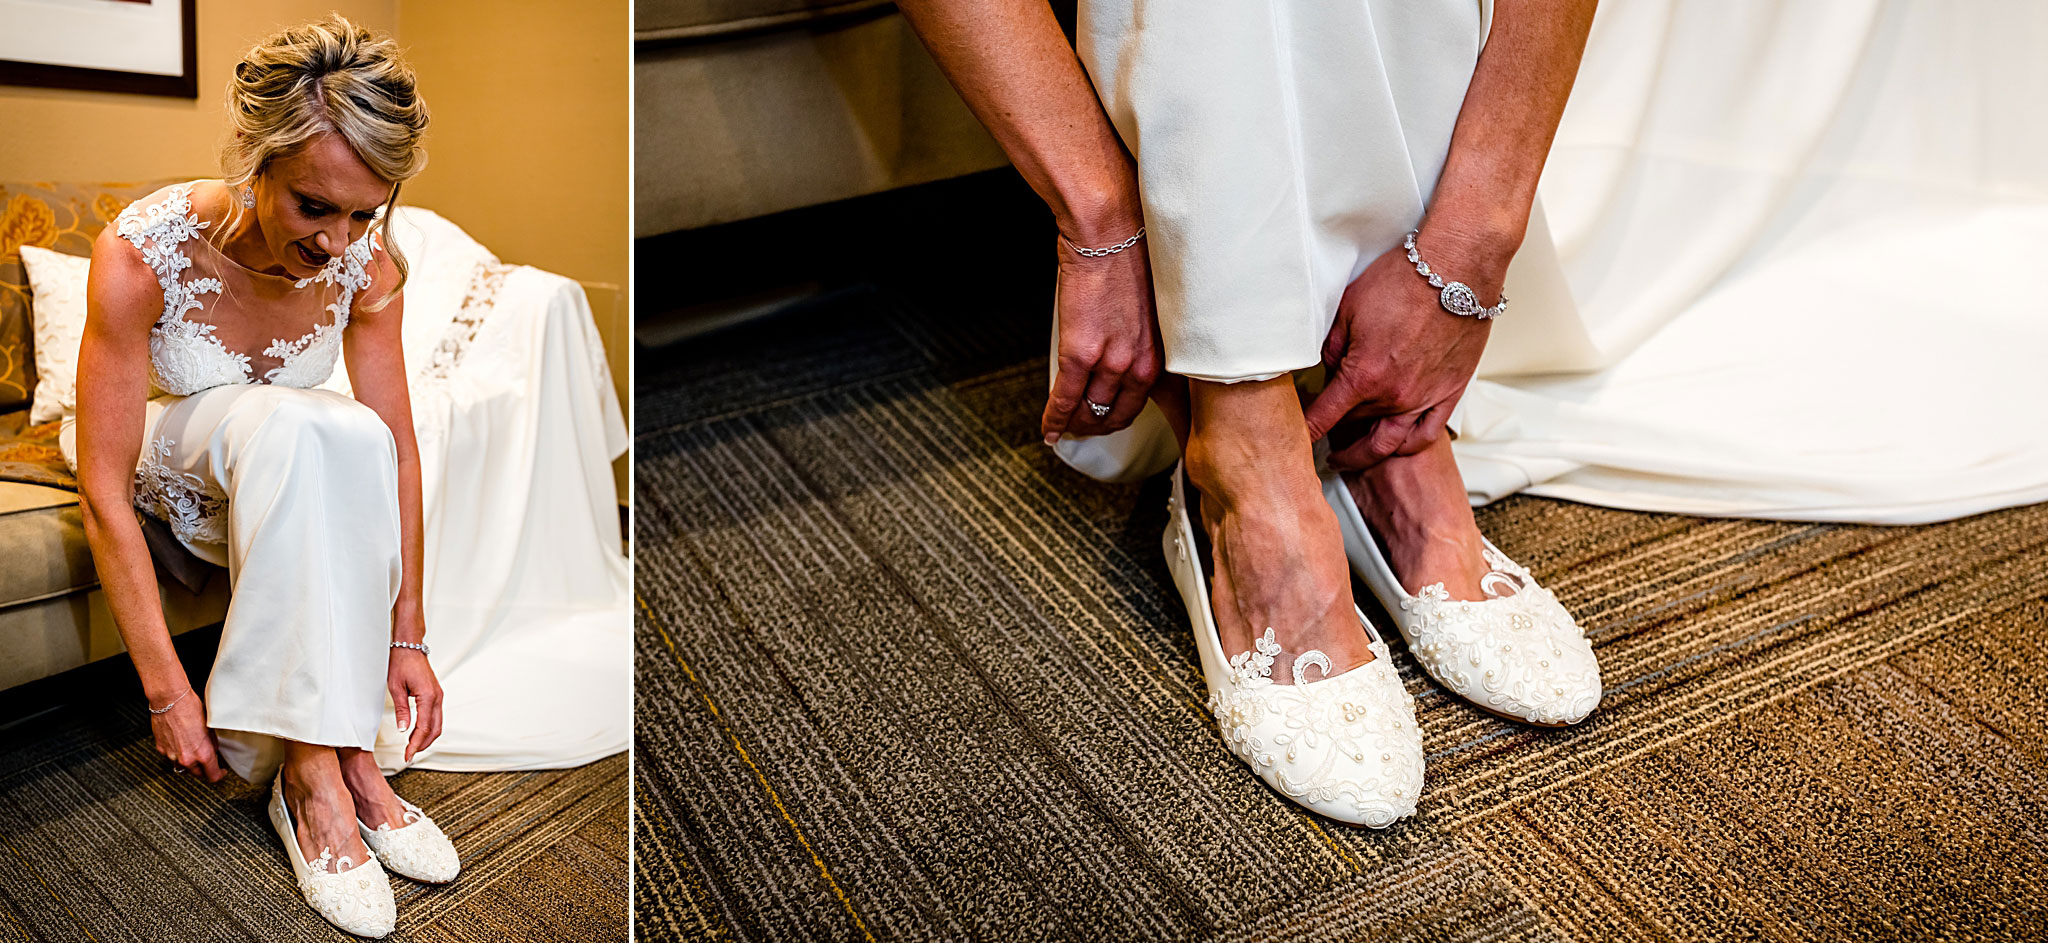 Bride putting her shoes on. Kelli & Jason's golf course wedding at The Ranch Country Club by Colorado Wedding Photographer Jennifer Garza, Small wedding ideas, Intimate wedding, Golf Course Wedding, Country Club Wedding, Summer Wedding, Golf Wedding, Wedding planning, Colorado Wedding Photographer, Colorado Elopement Photographer, Colorado Elopement, Colorado Wedding, Denver Wedding Photographer, Denver Wedding, Wedding Inspiration, Summer Wedding Inspiration, Colorado Bride